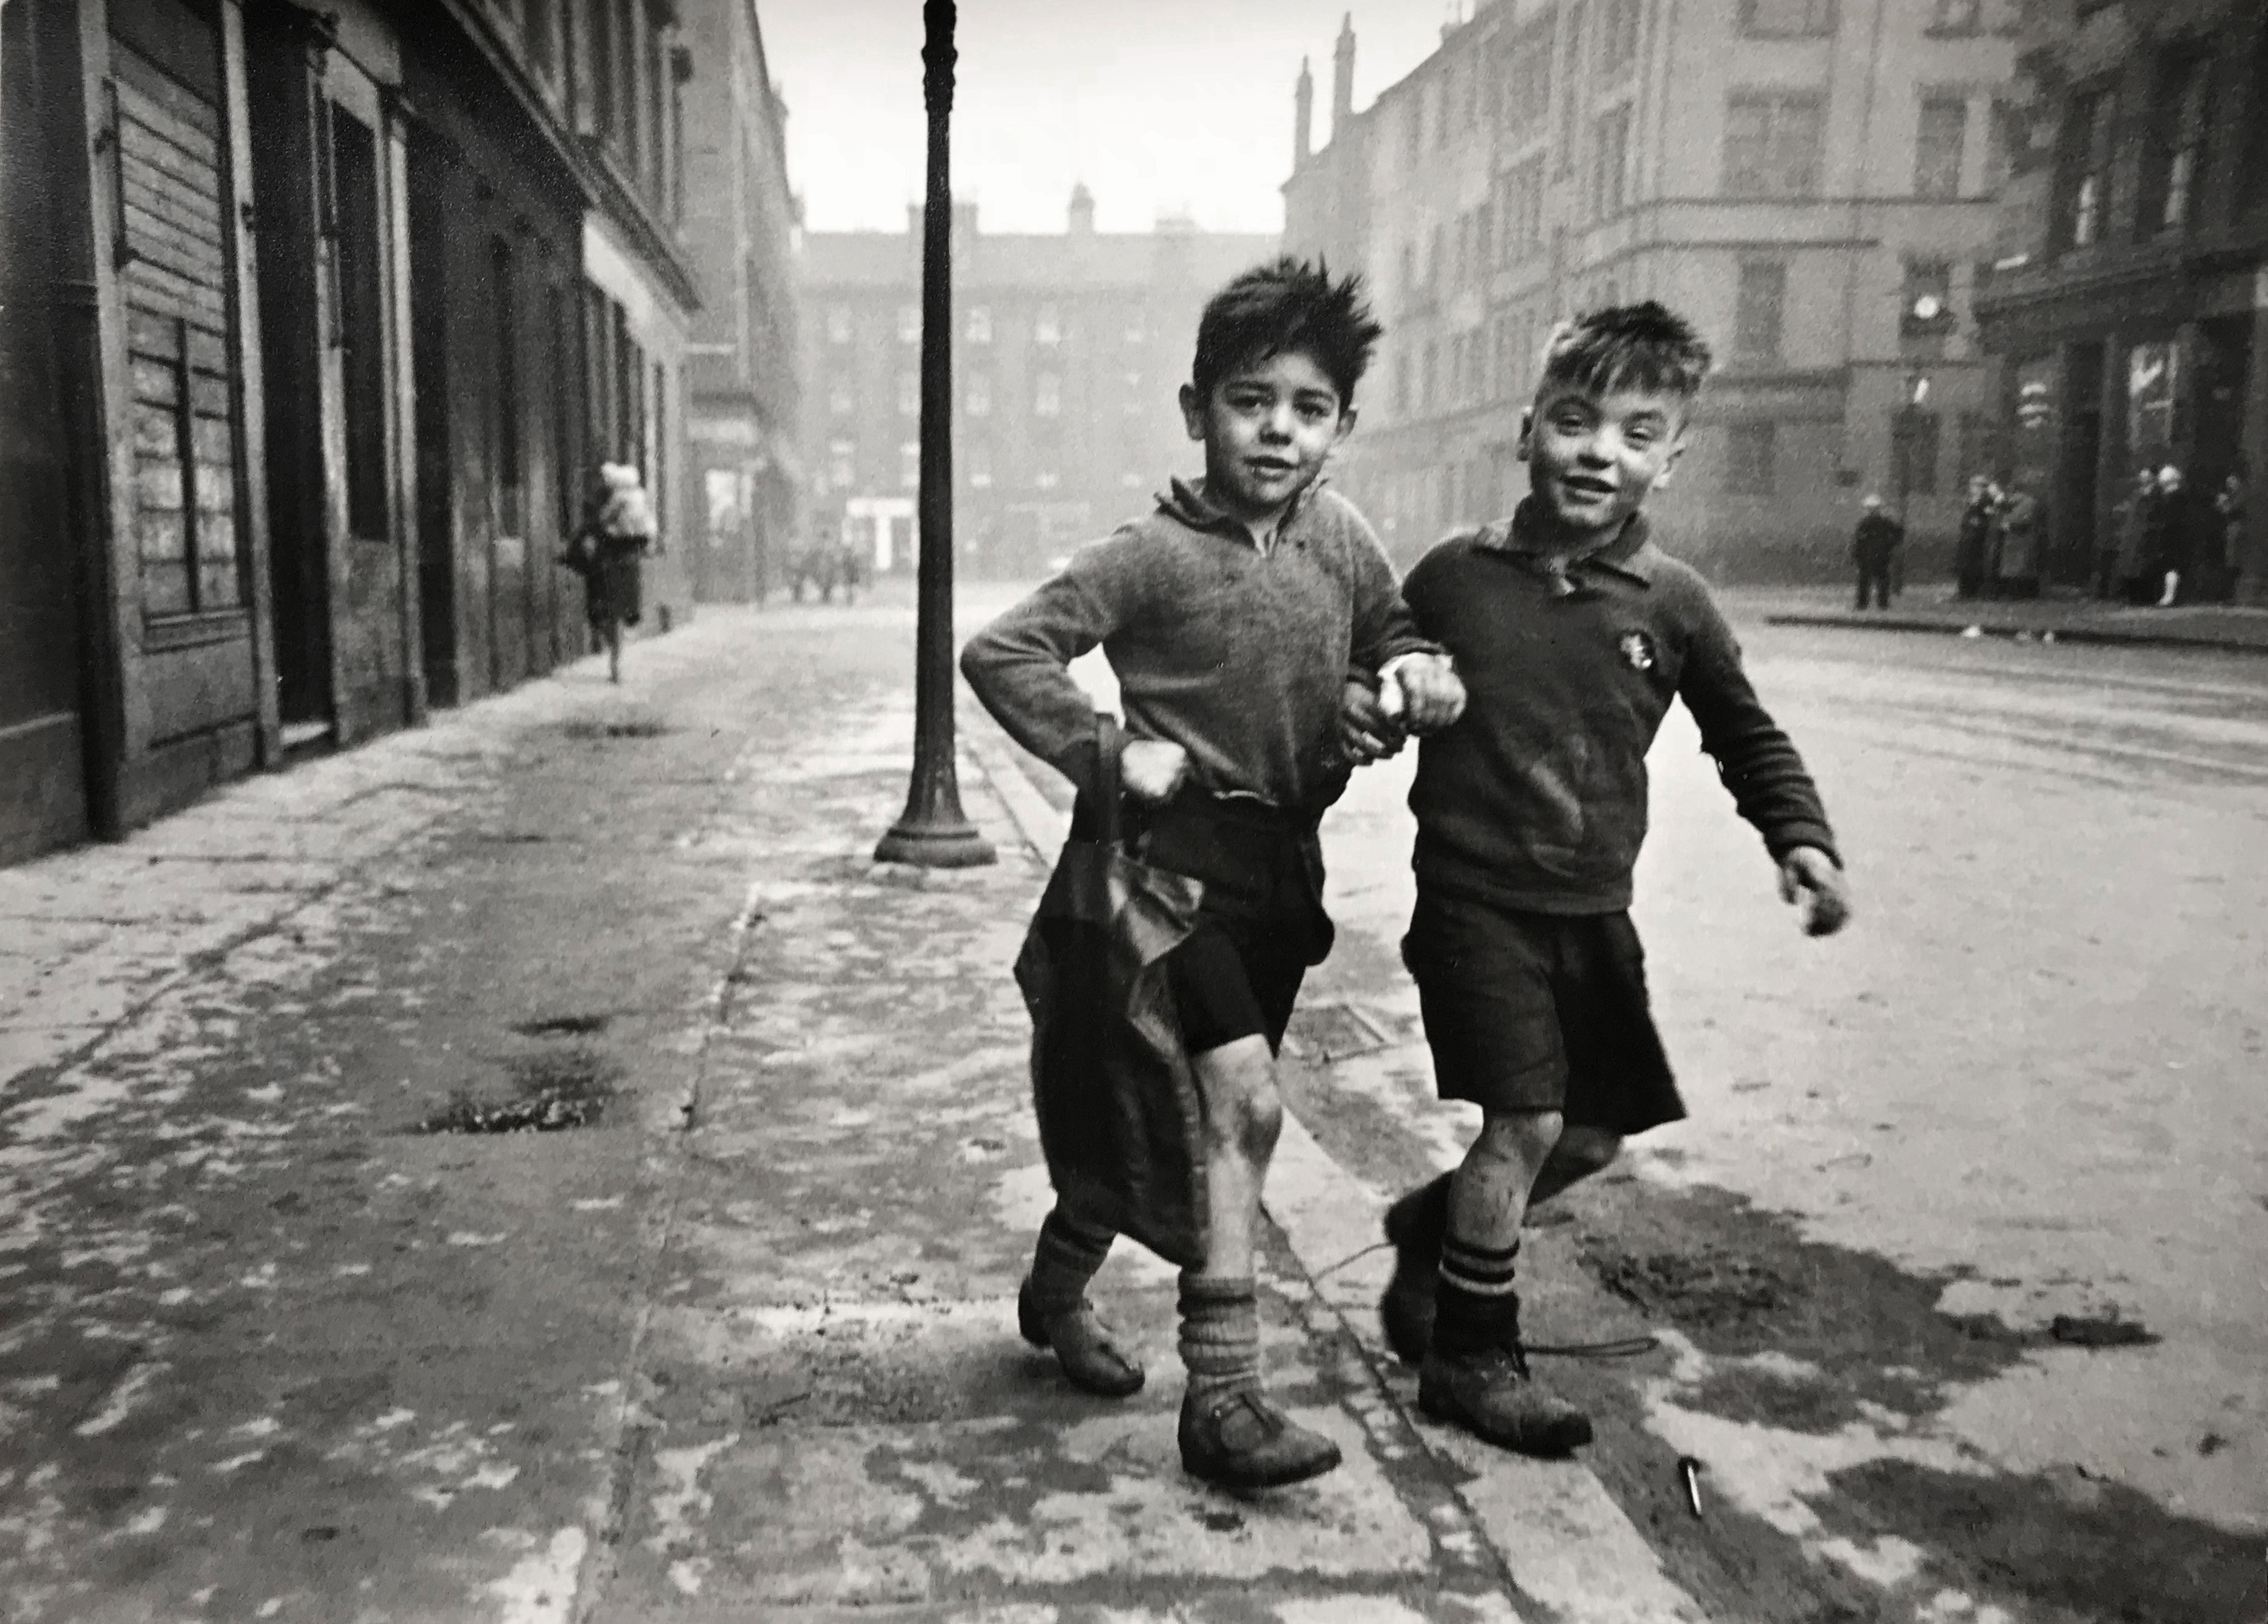 two boys playing the the street in old black and white photo